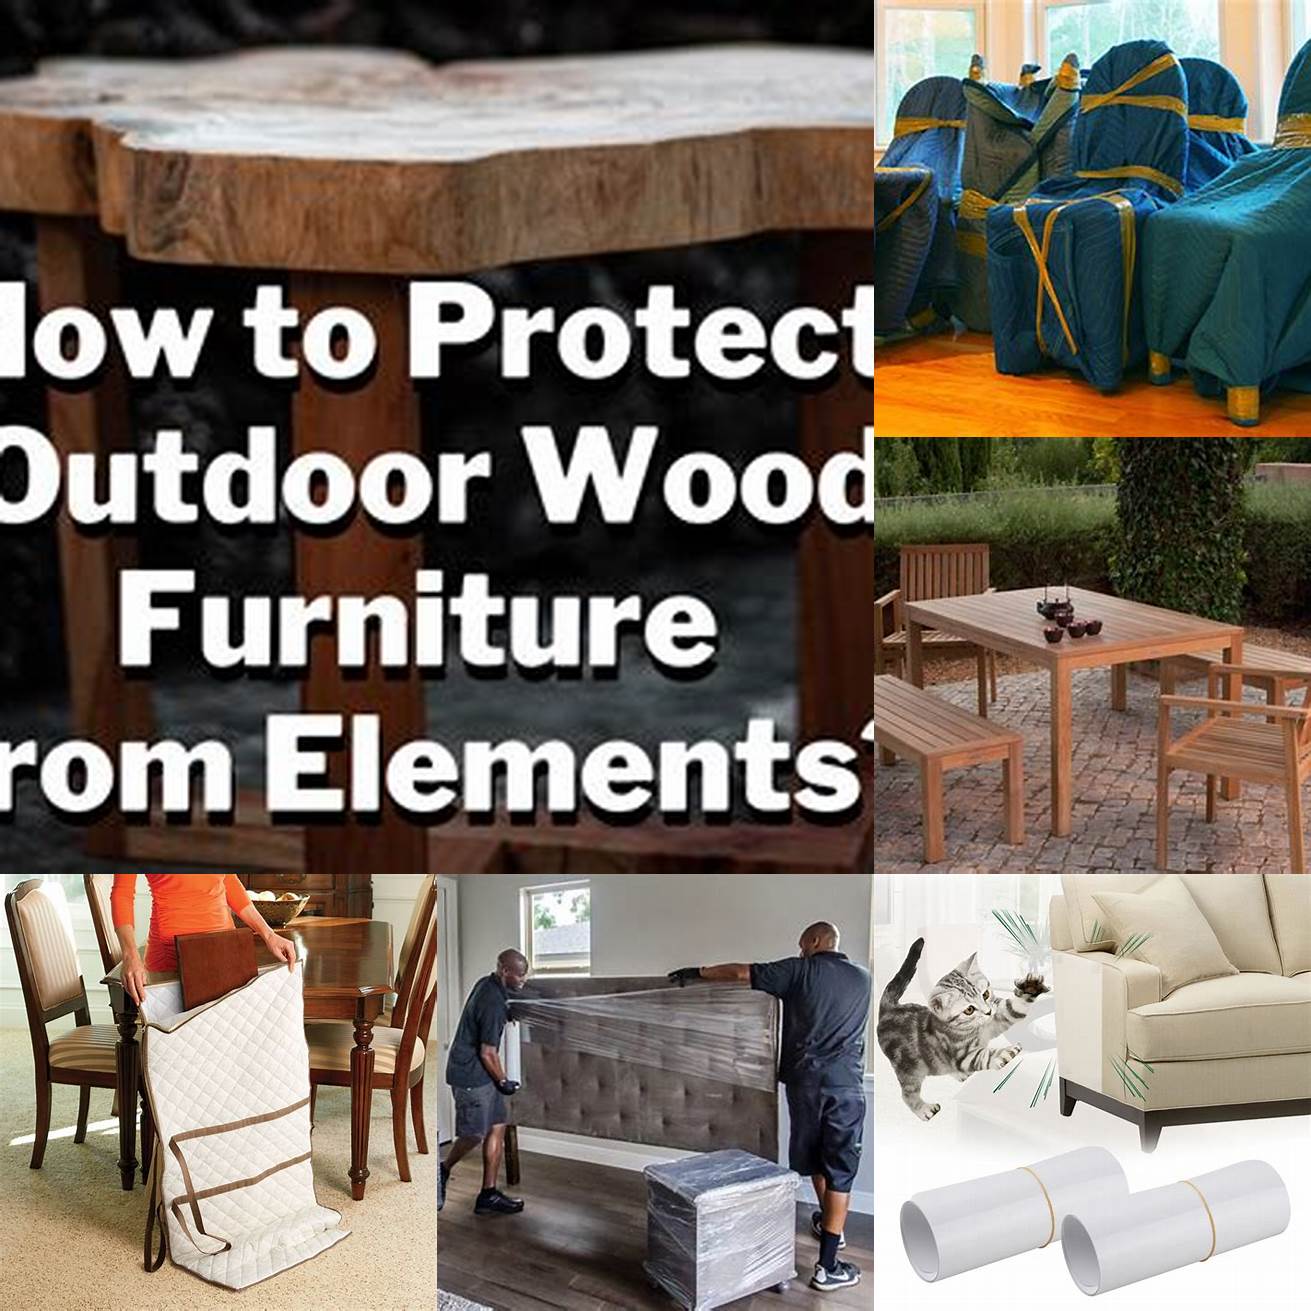 Protect the furniture from the elements